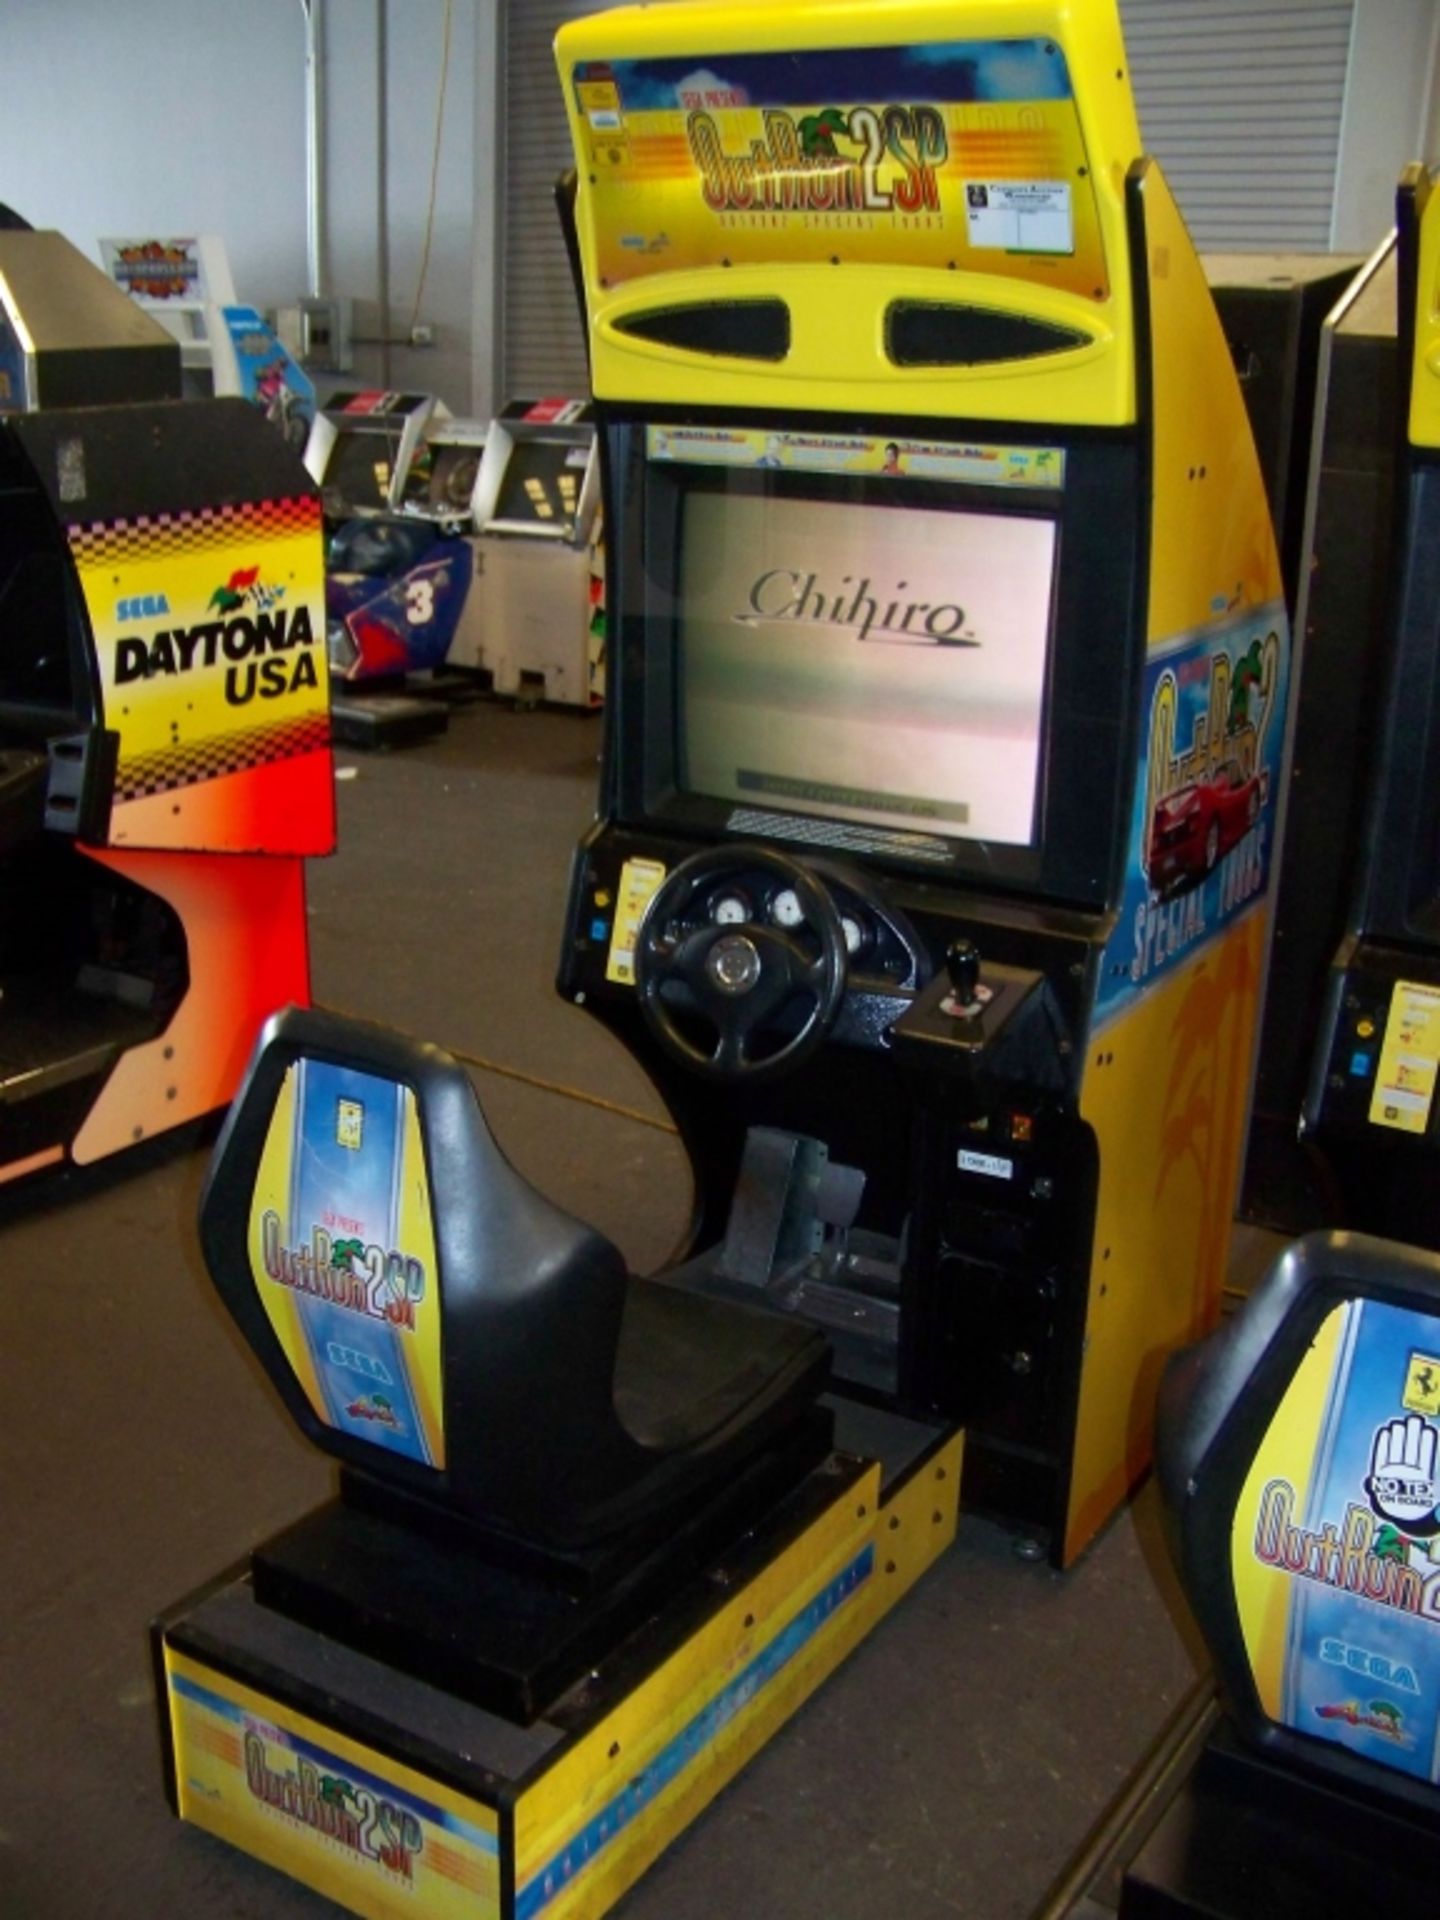 OUTRUN 2 SPECIAL EDITION RACING ARCADE GAME SEGA Item is in used condition. Evidence of wear and - Image 4 of 9